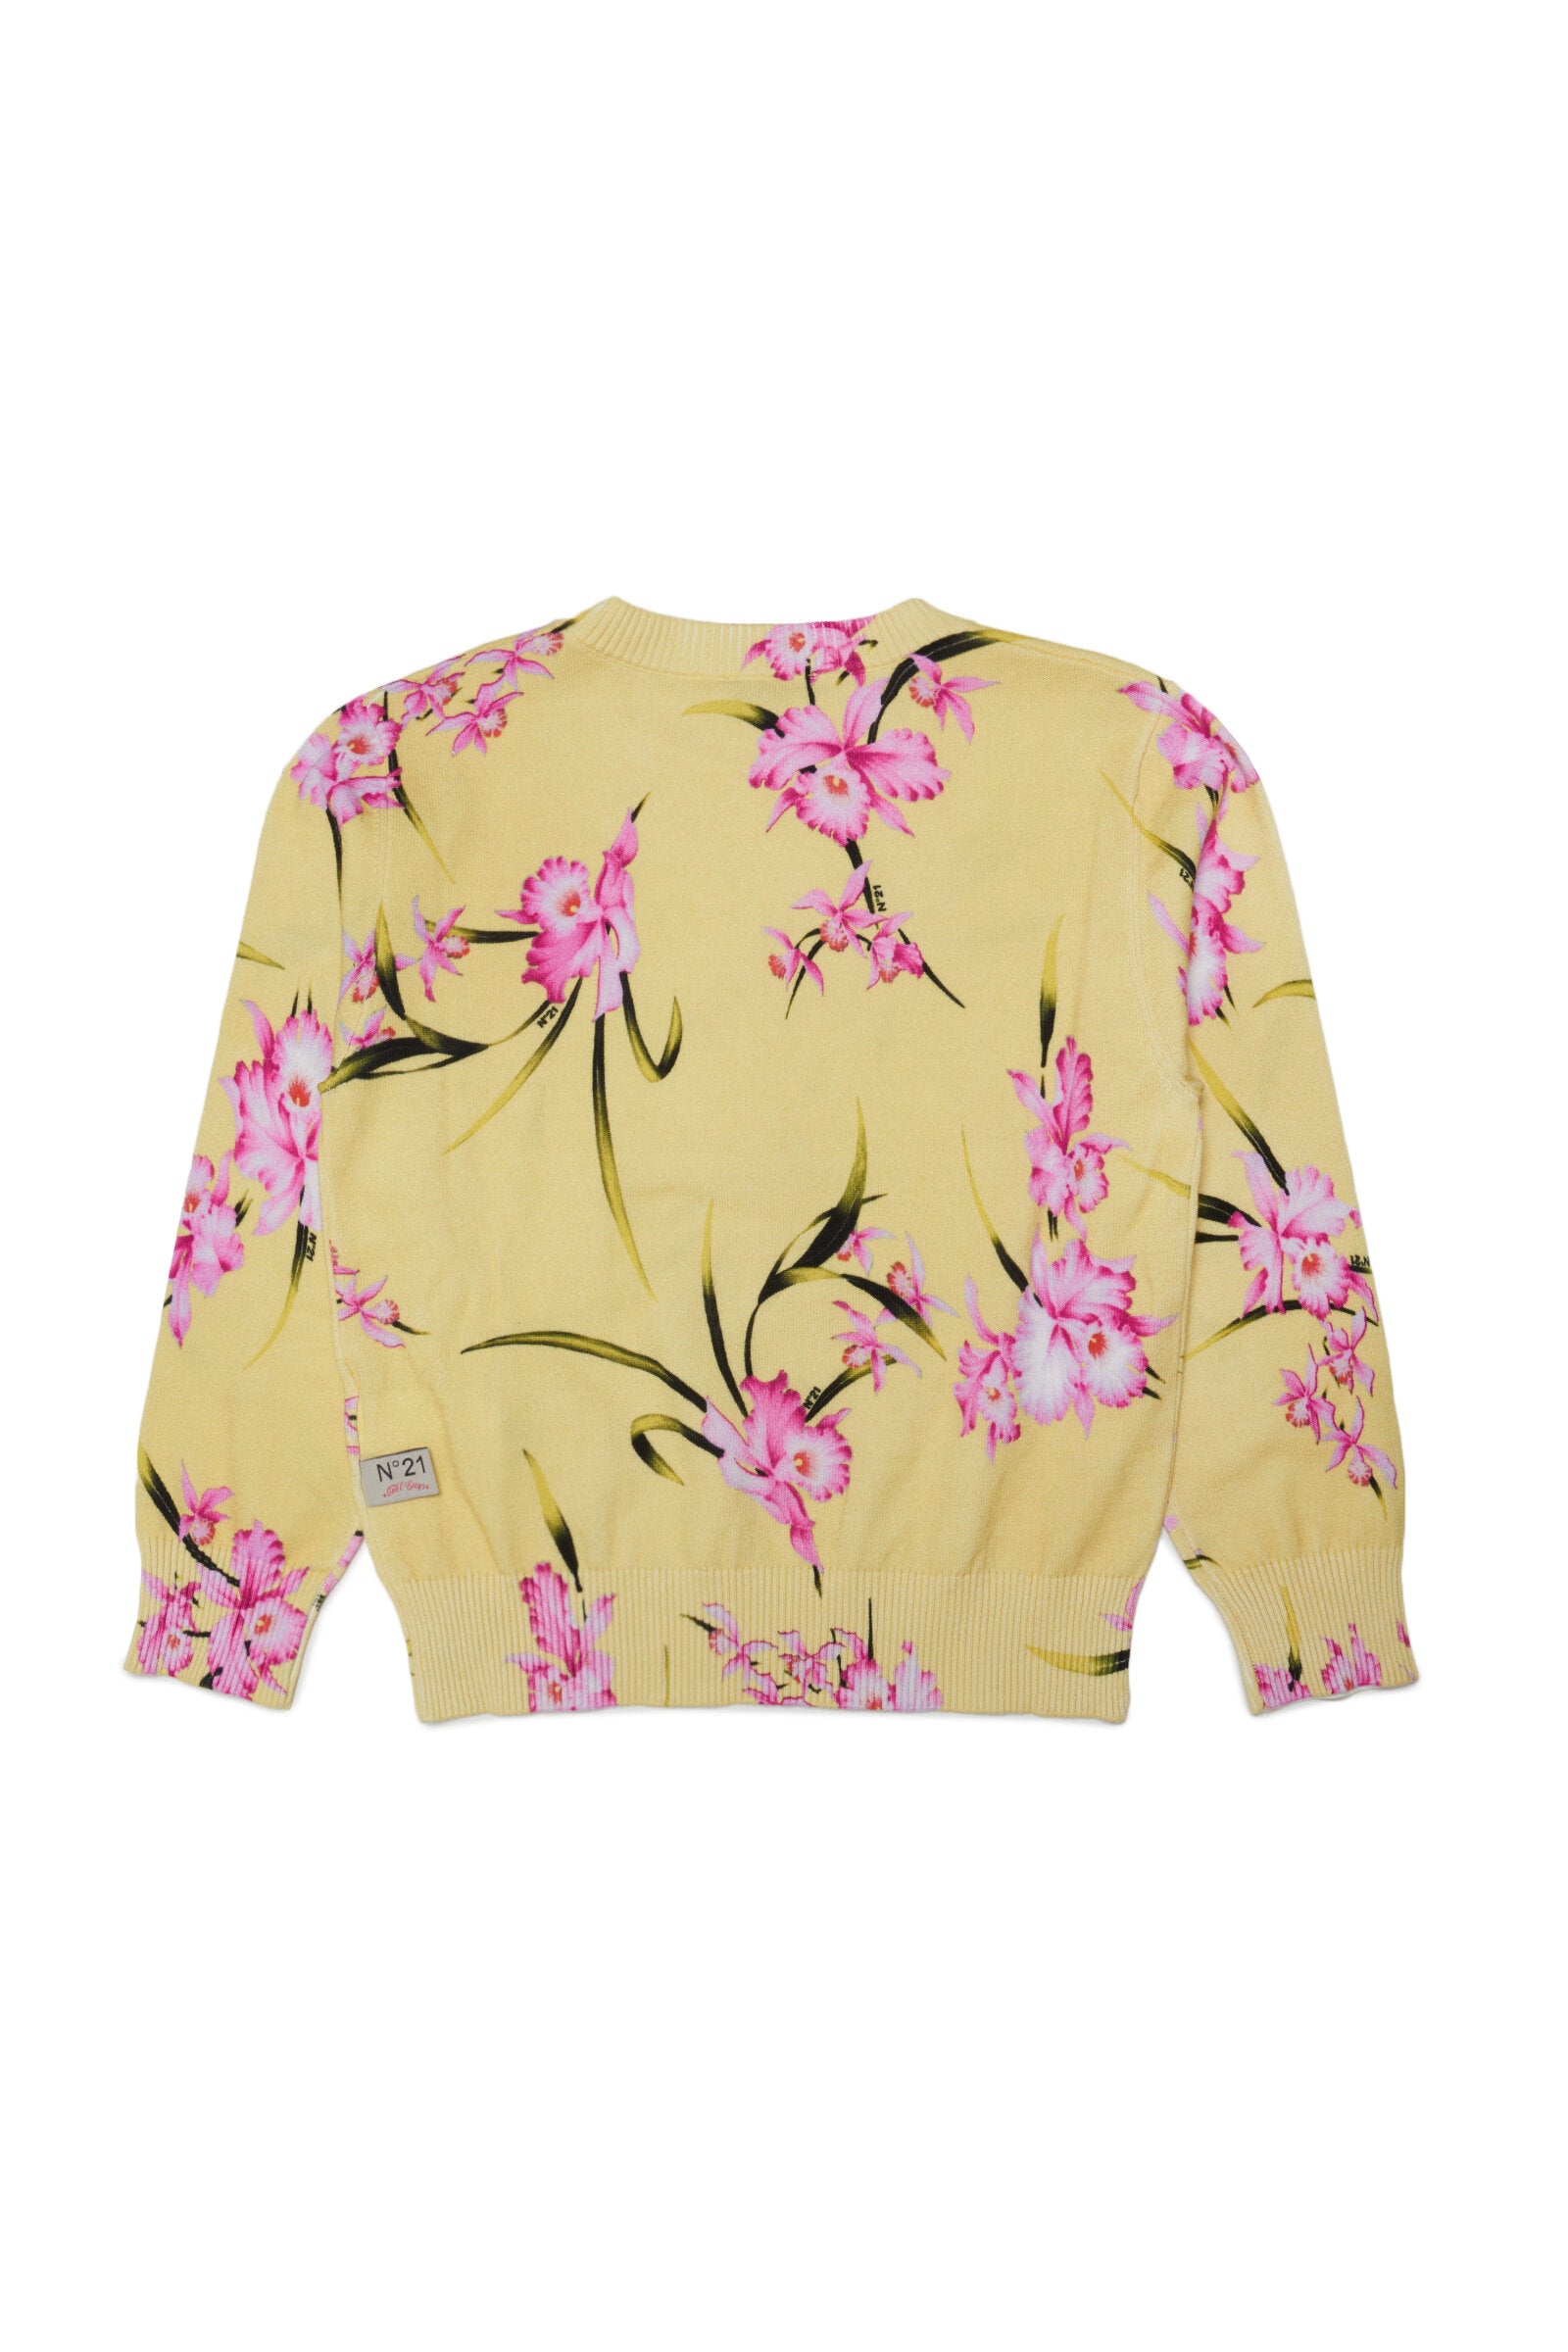 Yellow long-sleeved cotton sweater with floral print